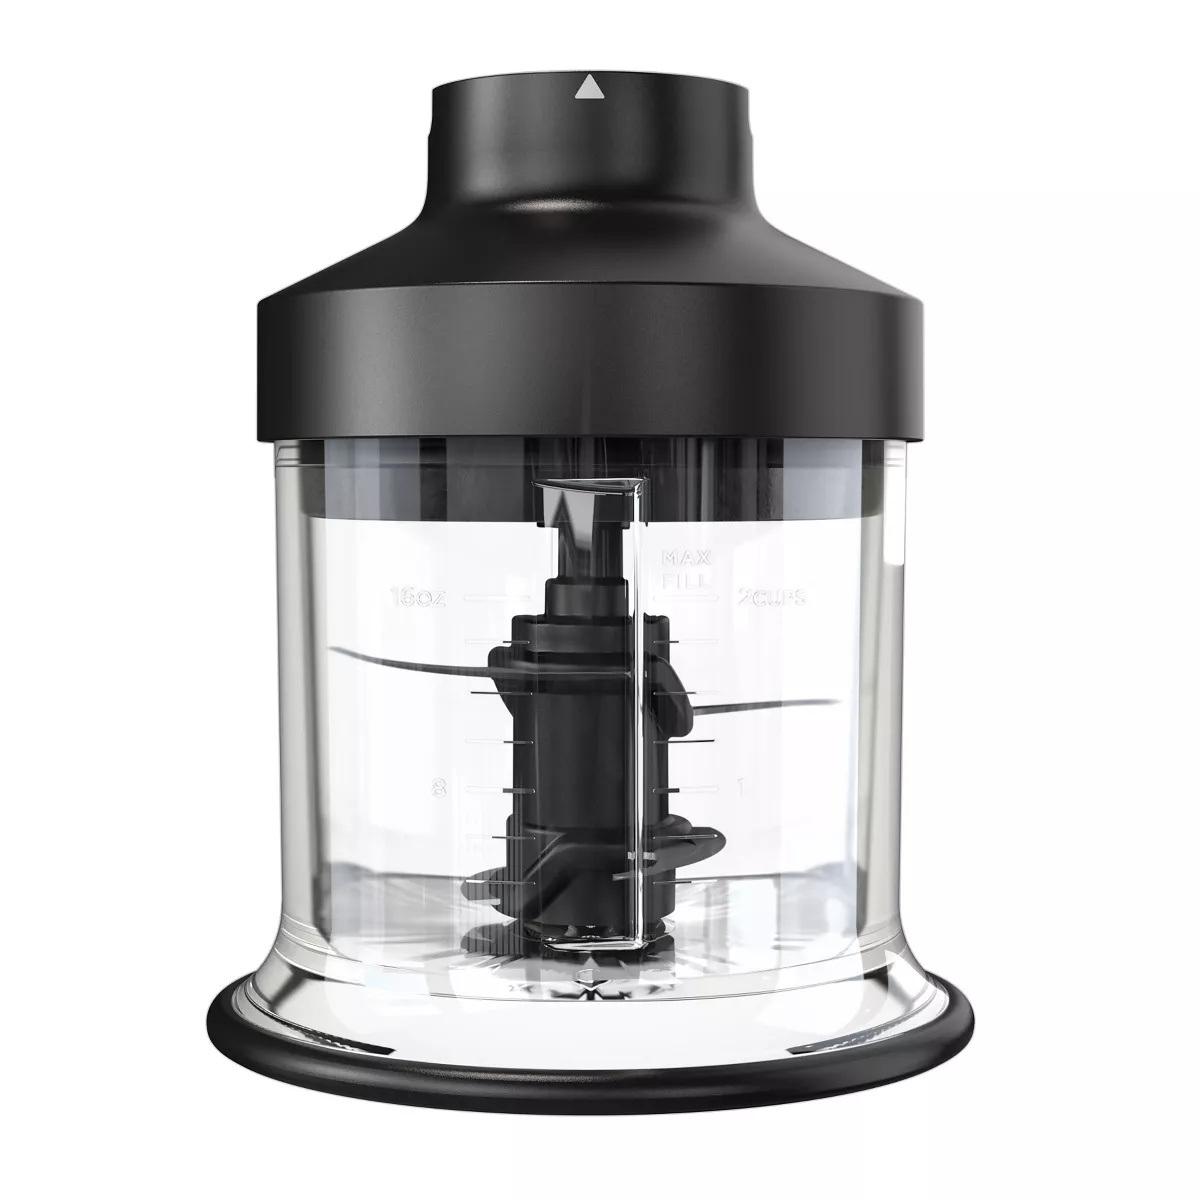 Black and clear food processor blender container.